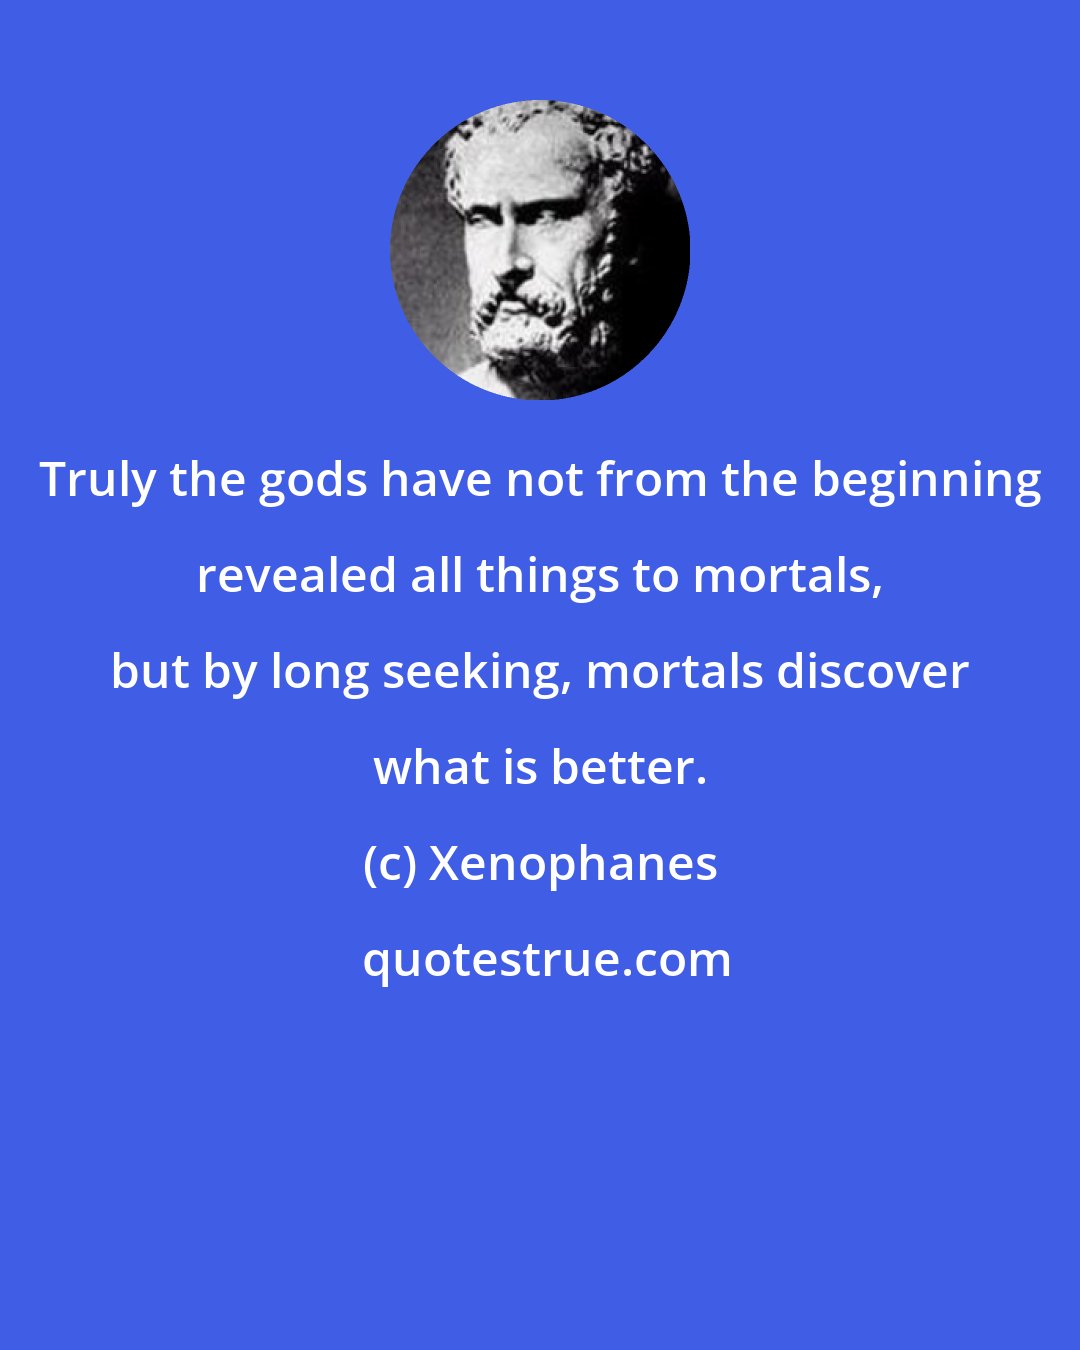 Xenophanes: Truly the gods have not from the beginning revealed all things to mortals, but by long seeking, mortals discover what is better.